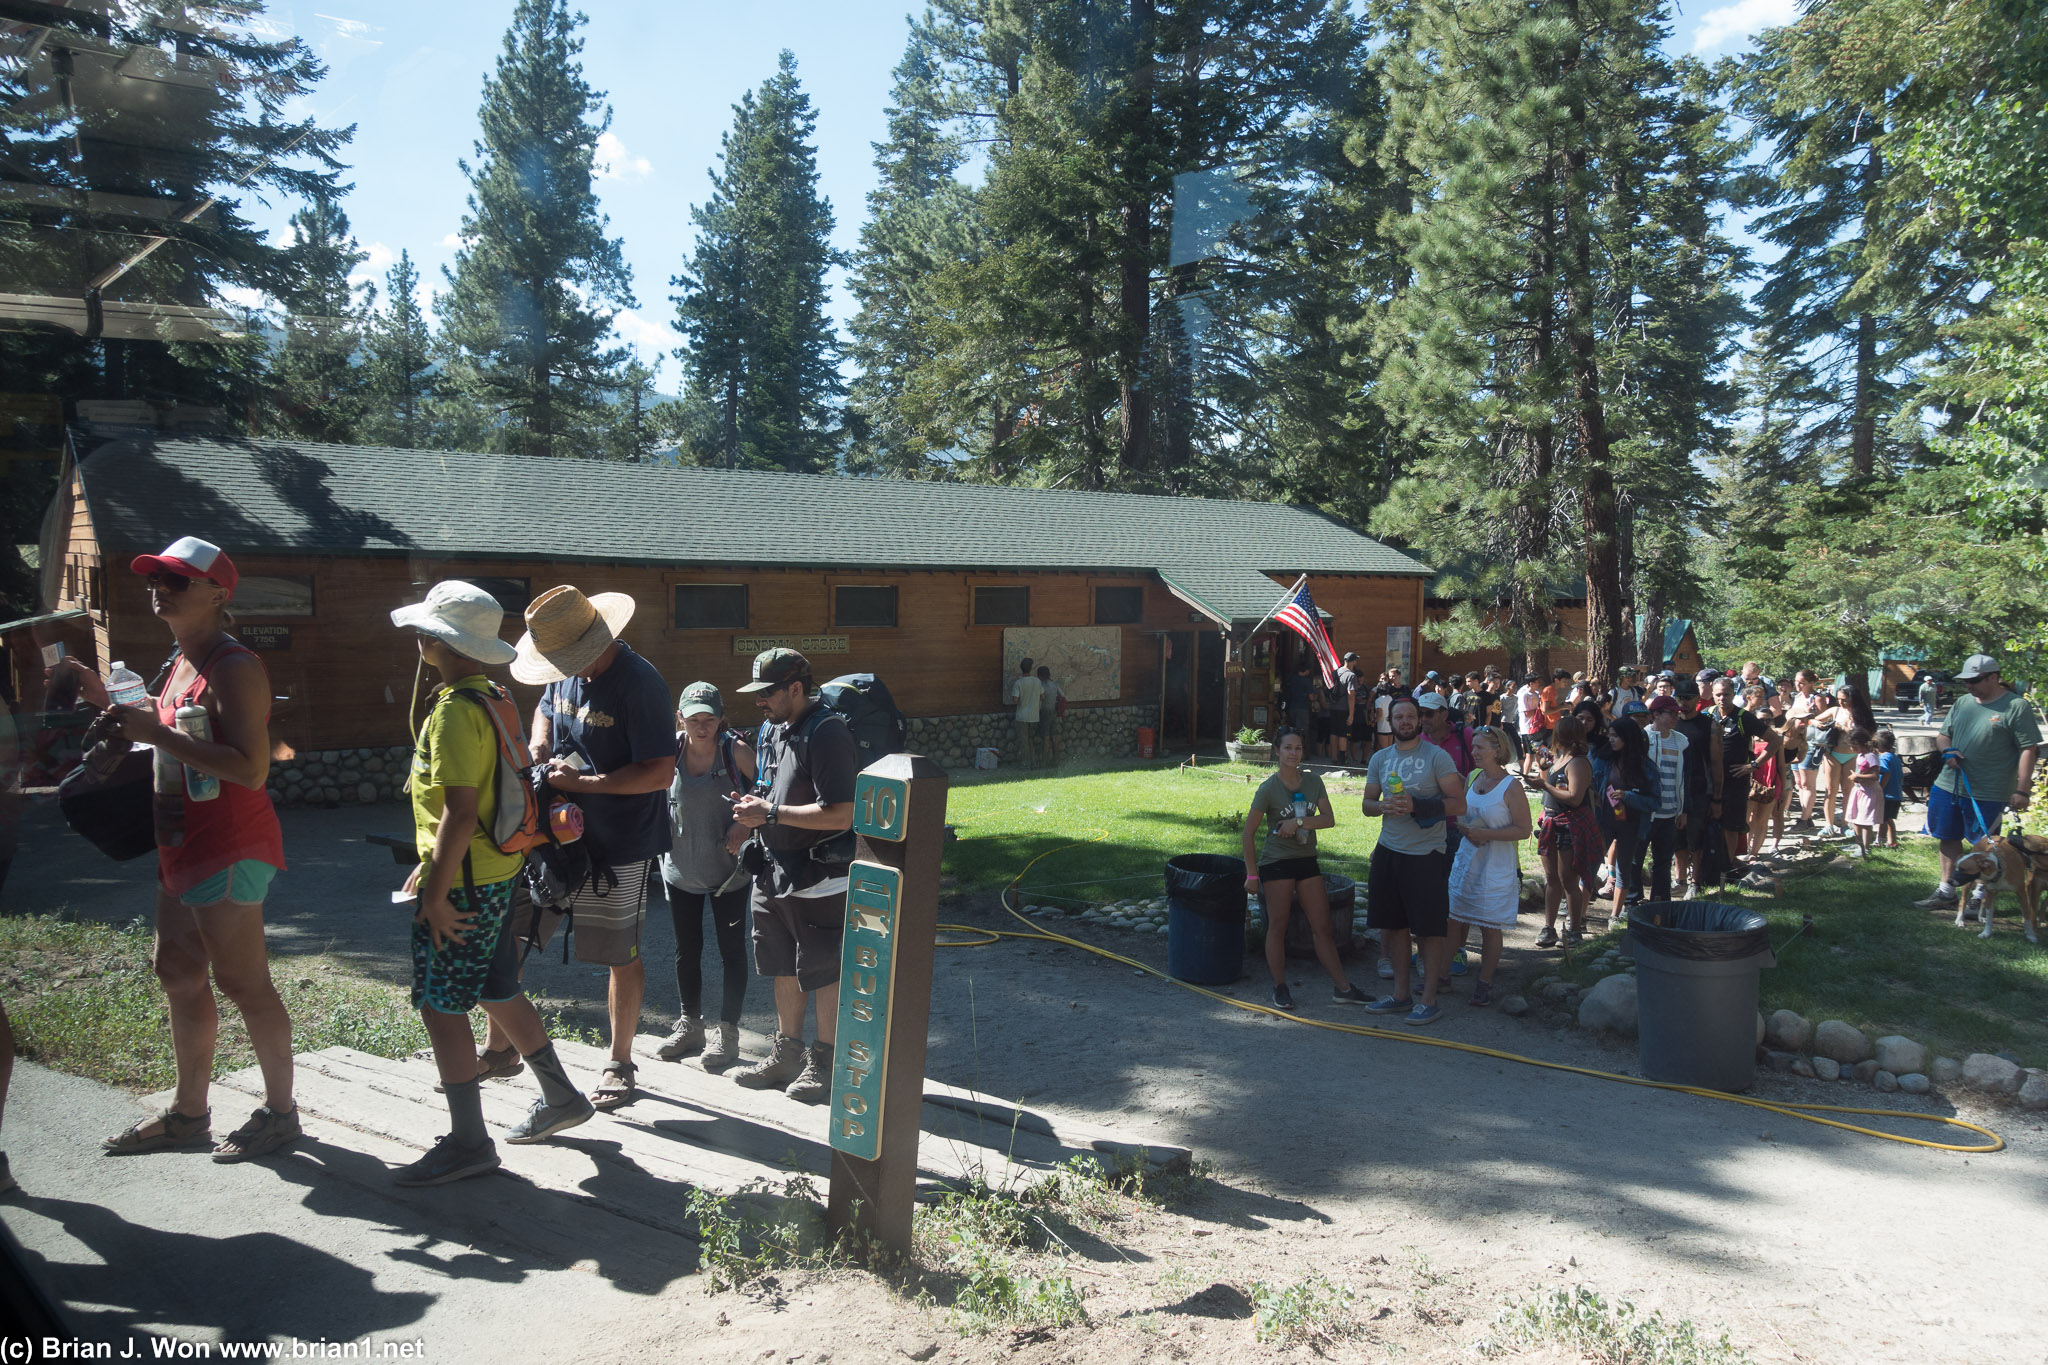 The crazy line for the shuttle at Reds Meadow Resort.